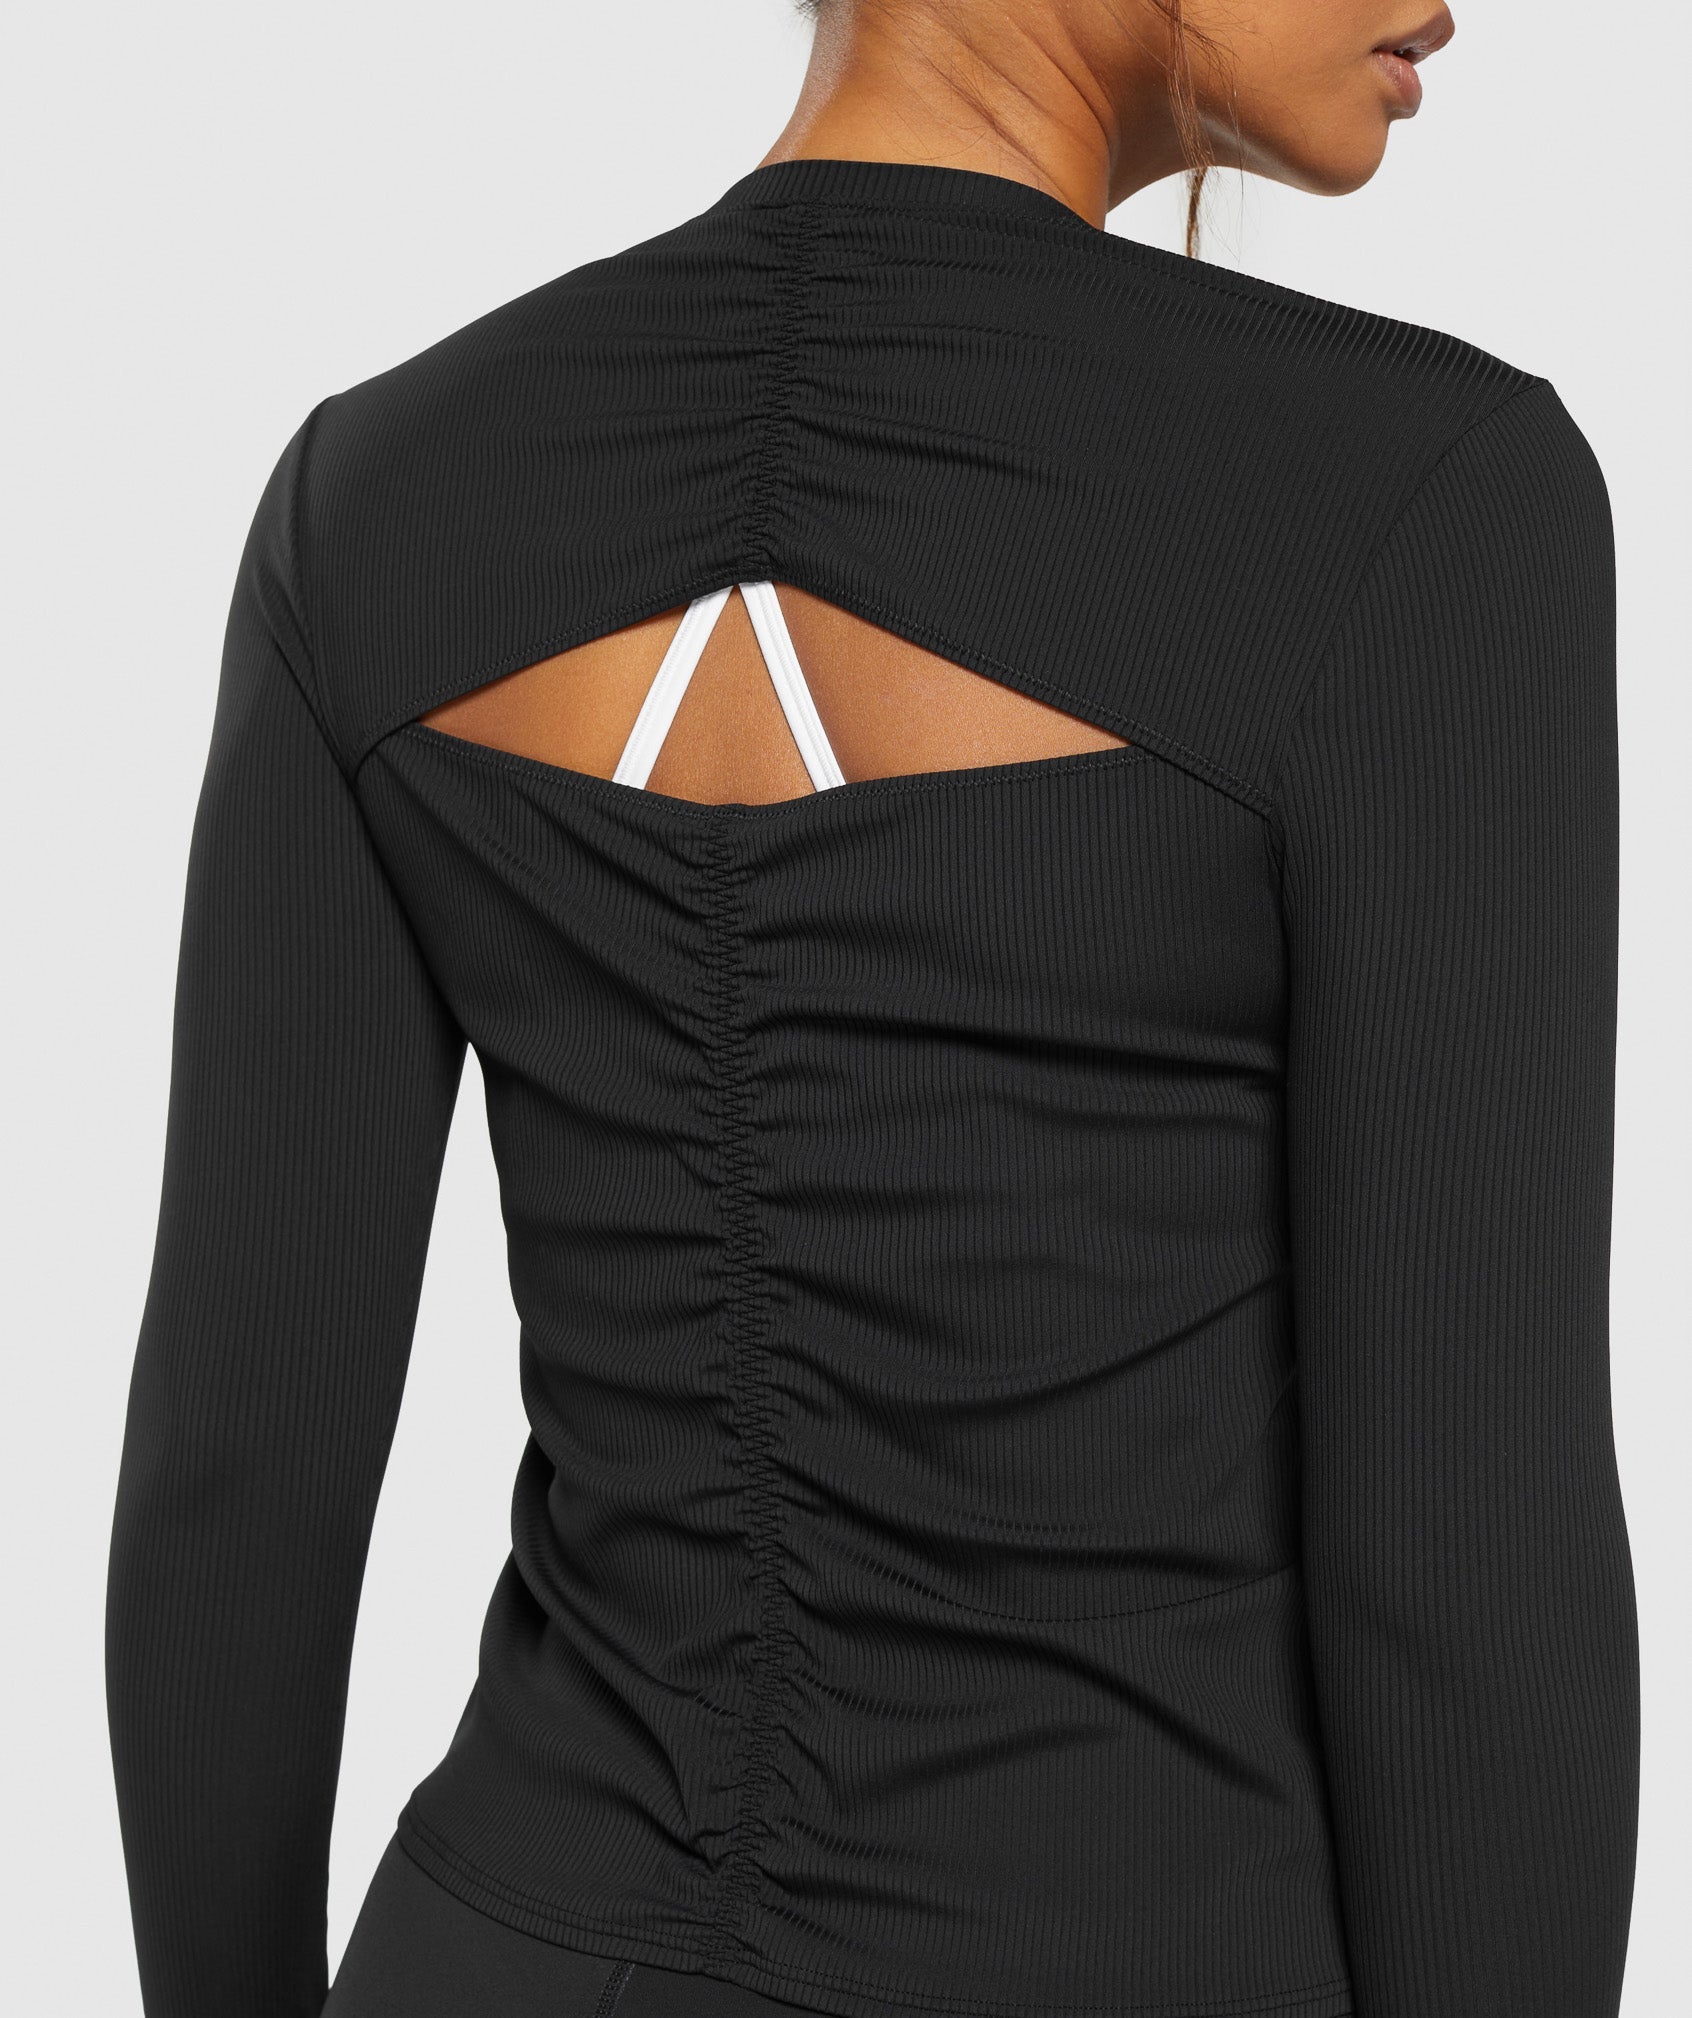 Elevate Long Sleeve Ruched Top in Black - view 6